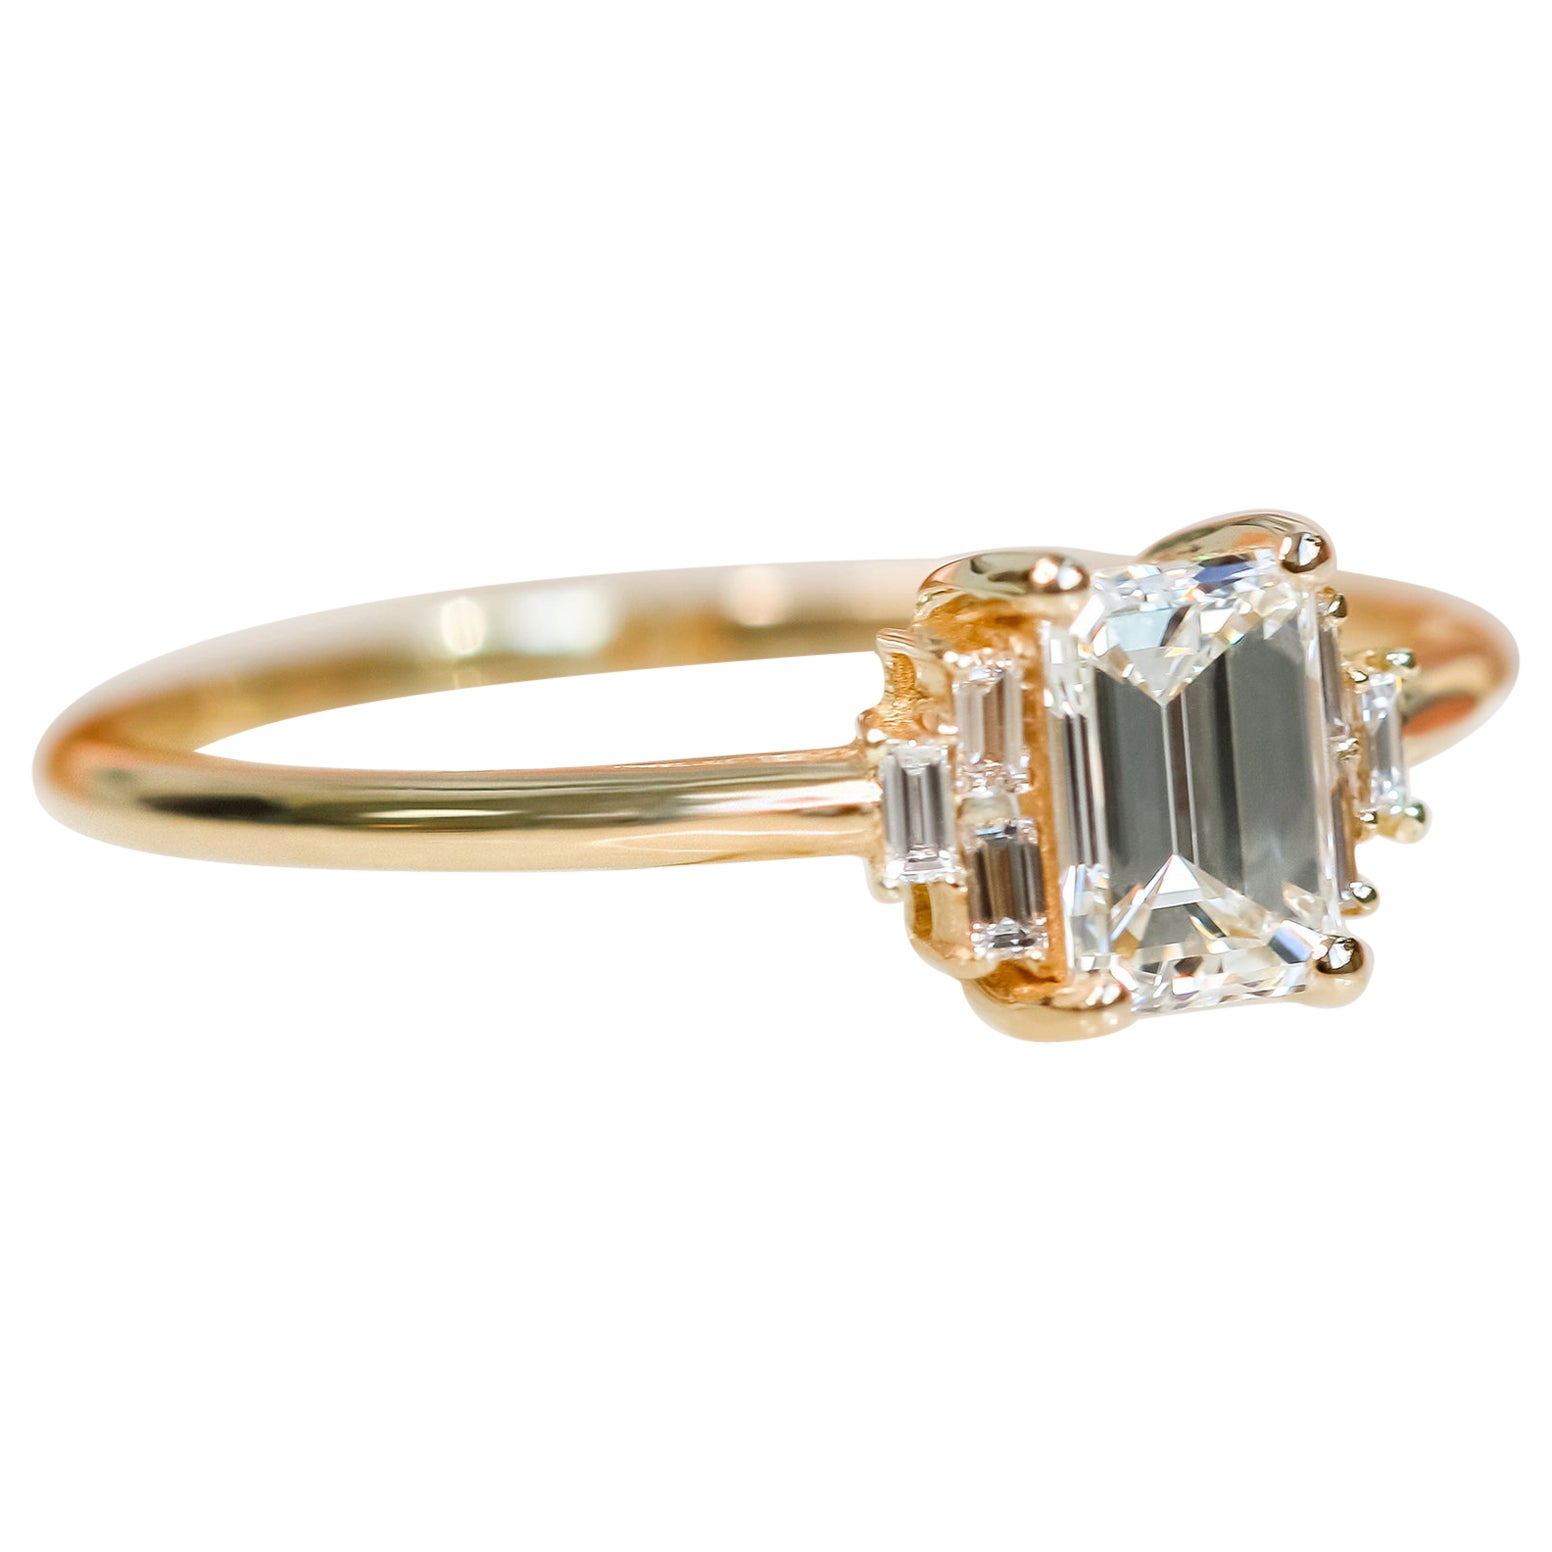 GIA 1.11 Cts Natural Emerald Cut Art-Deco Diamond Ring, Complimentary Baguettes